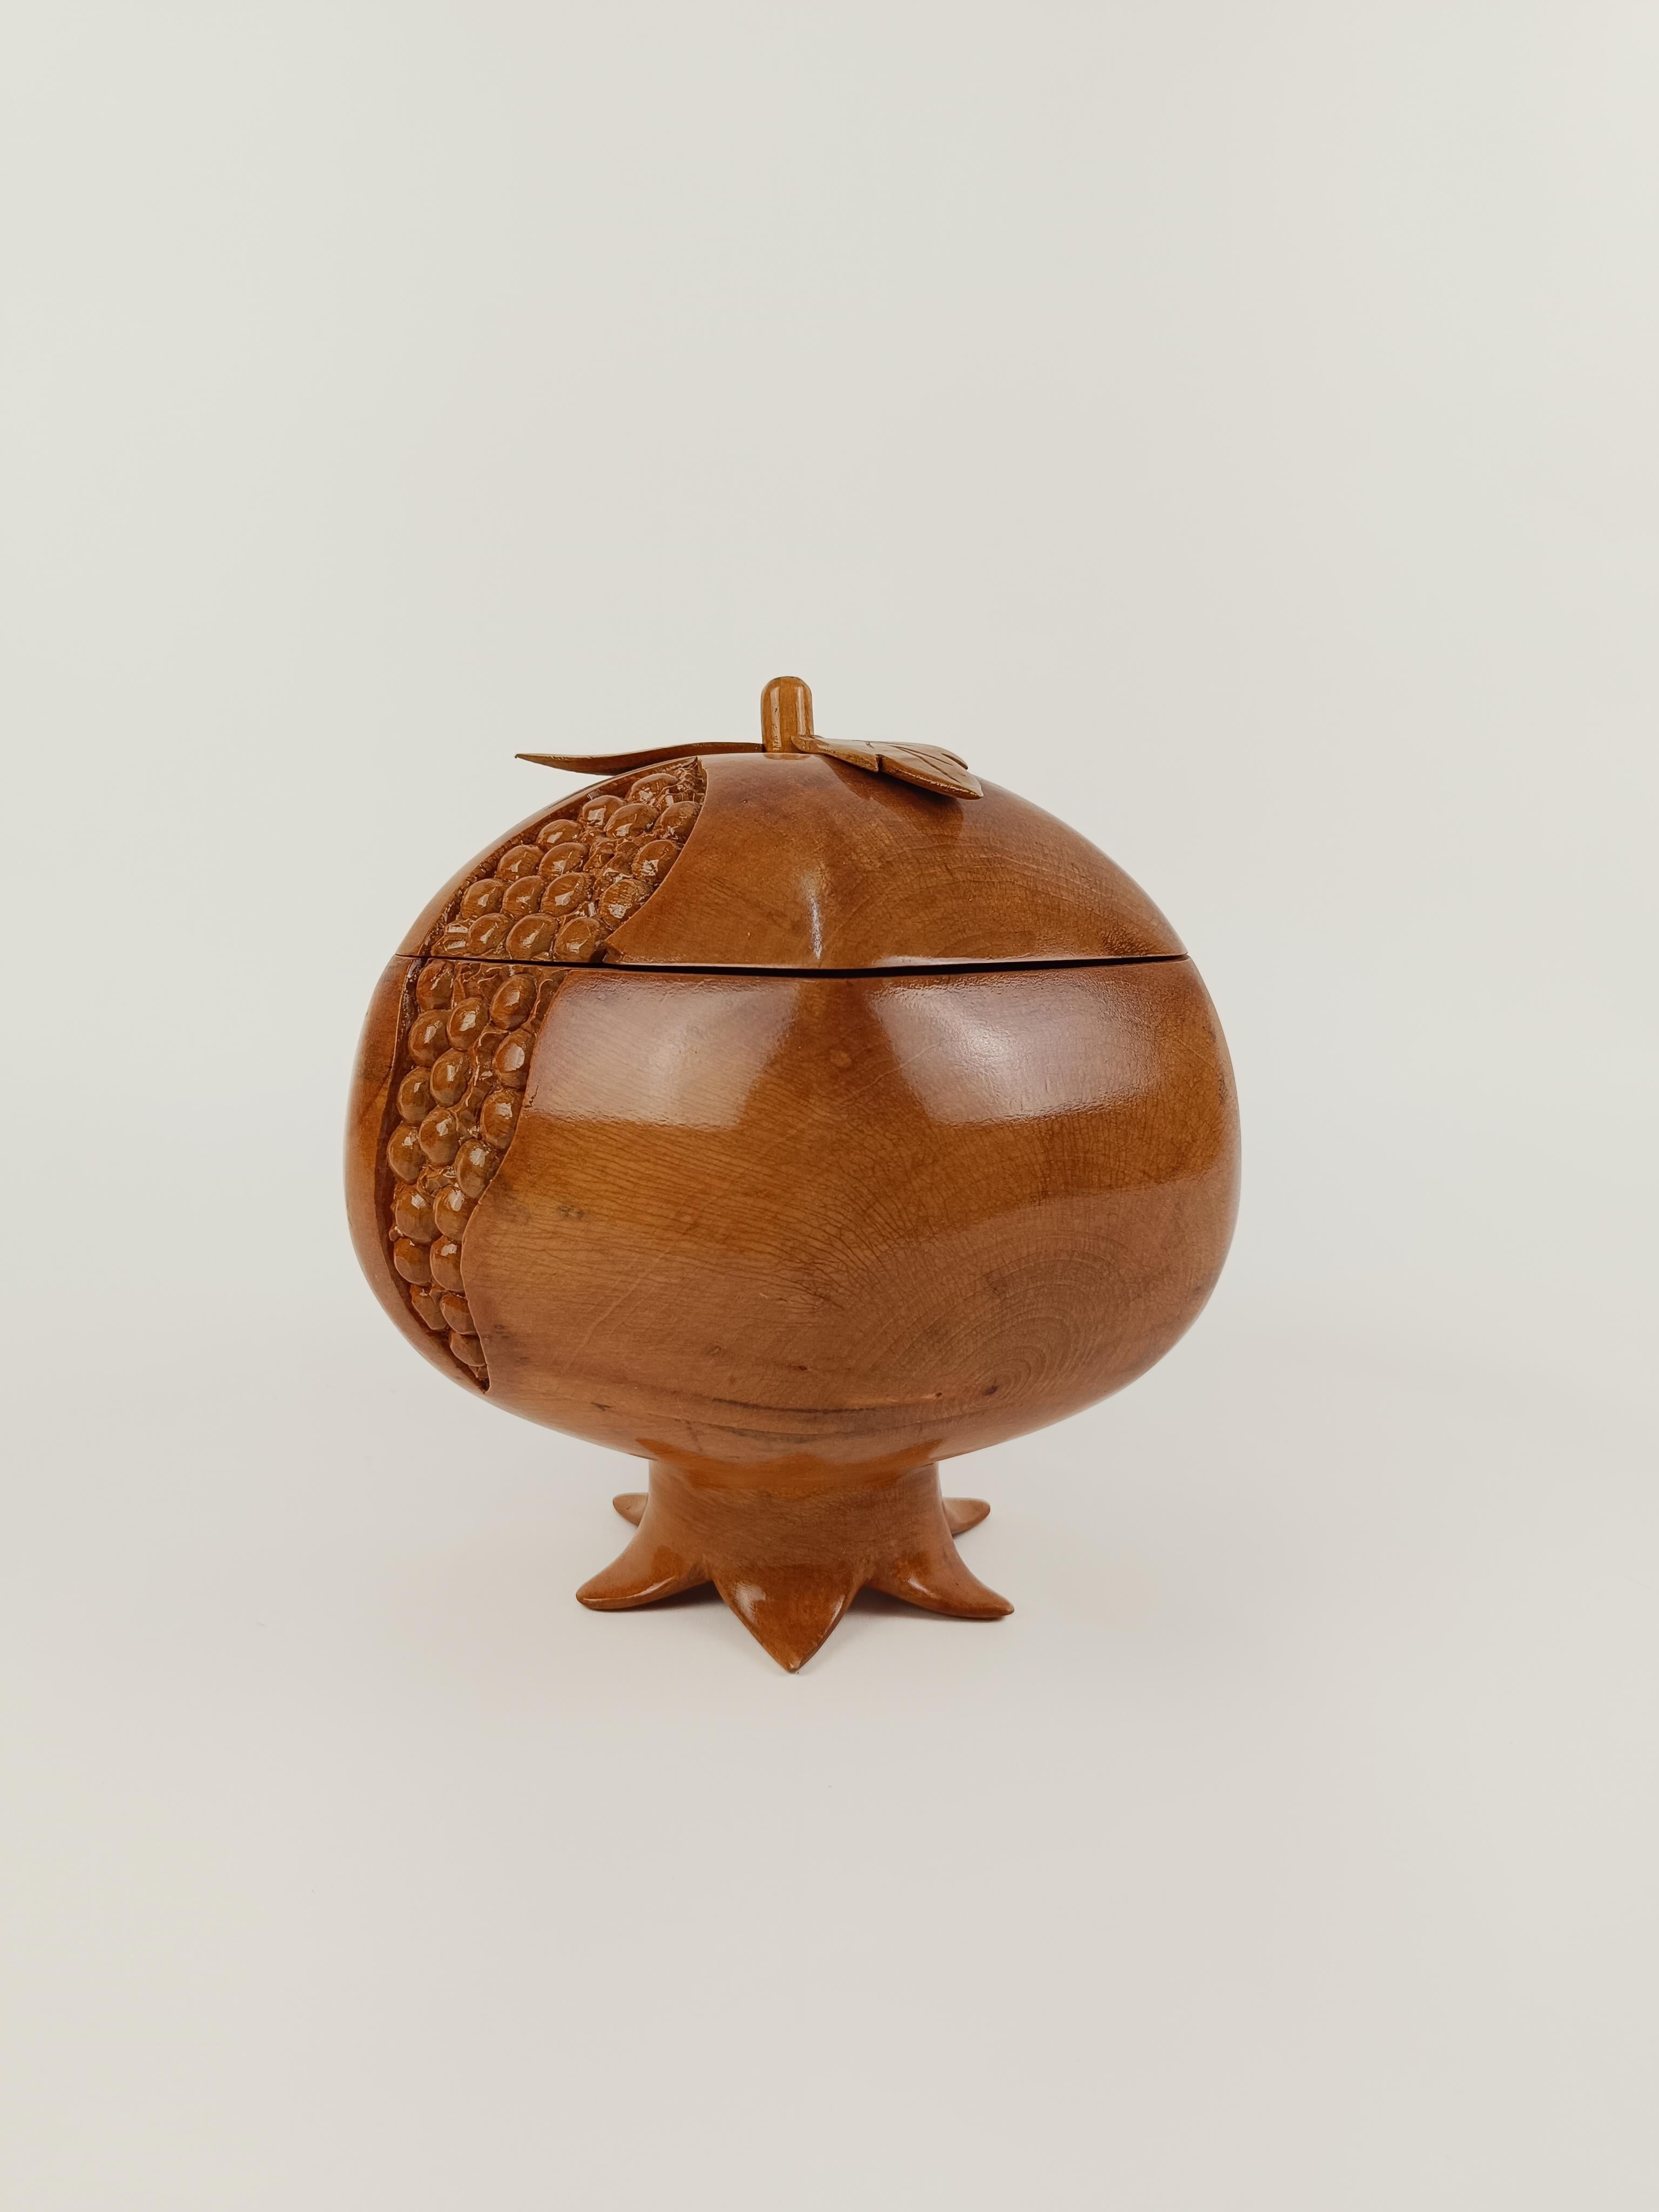 Maple Sculptural Vintage Ice Bucket in maple wood carved in the shape of a pomegranate For Sale